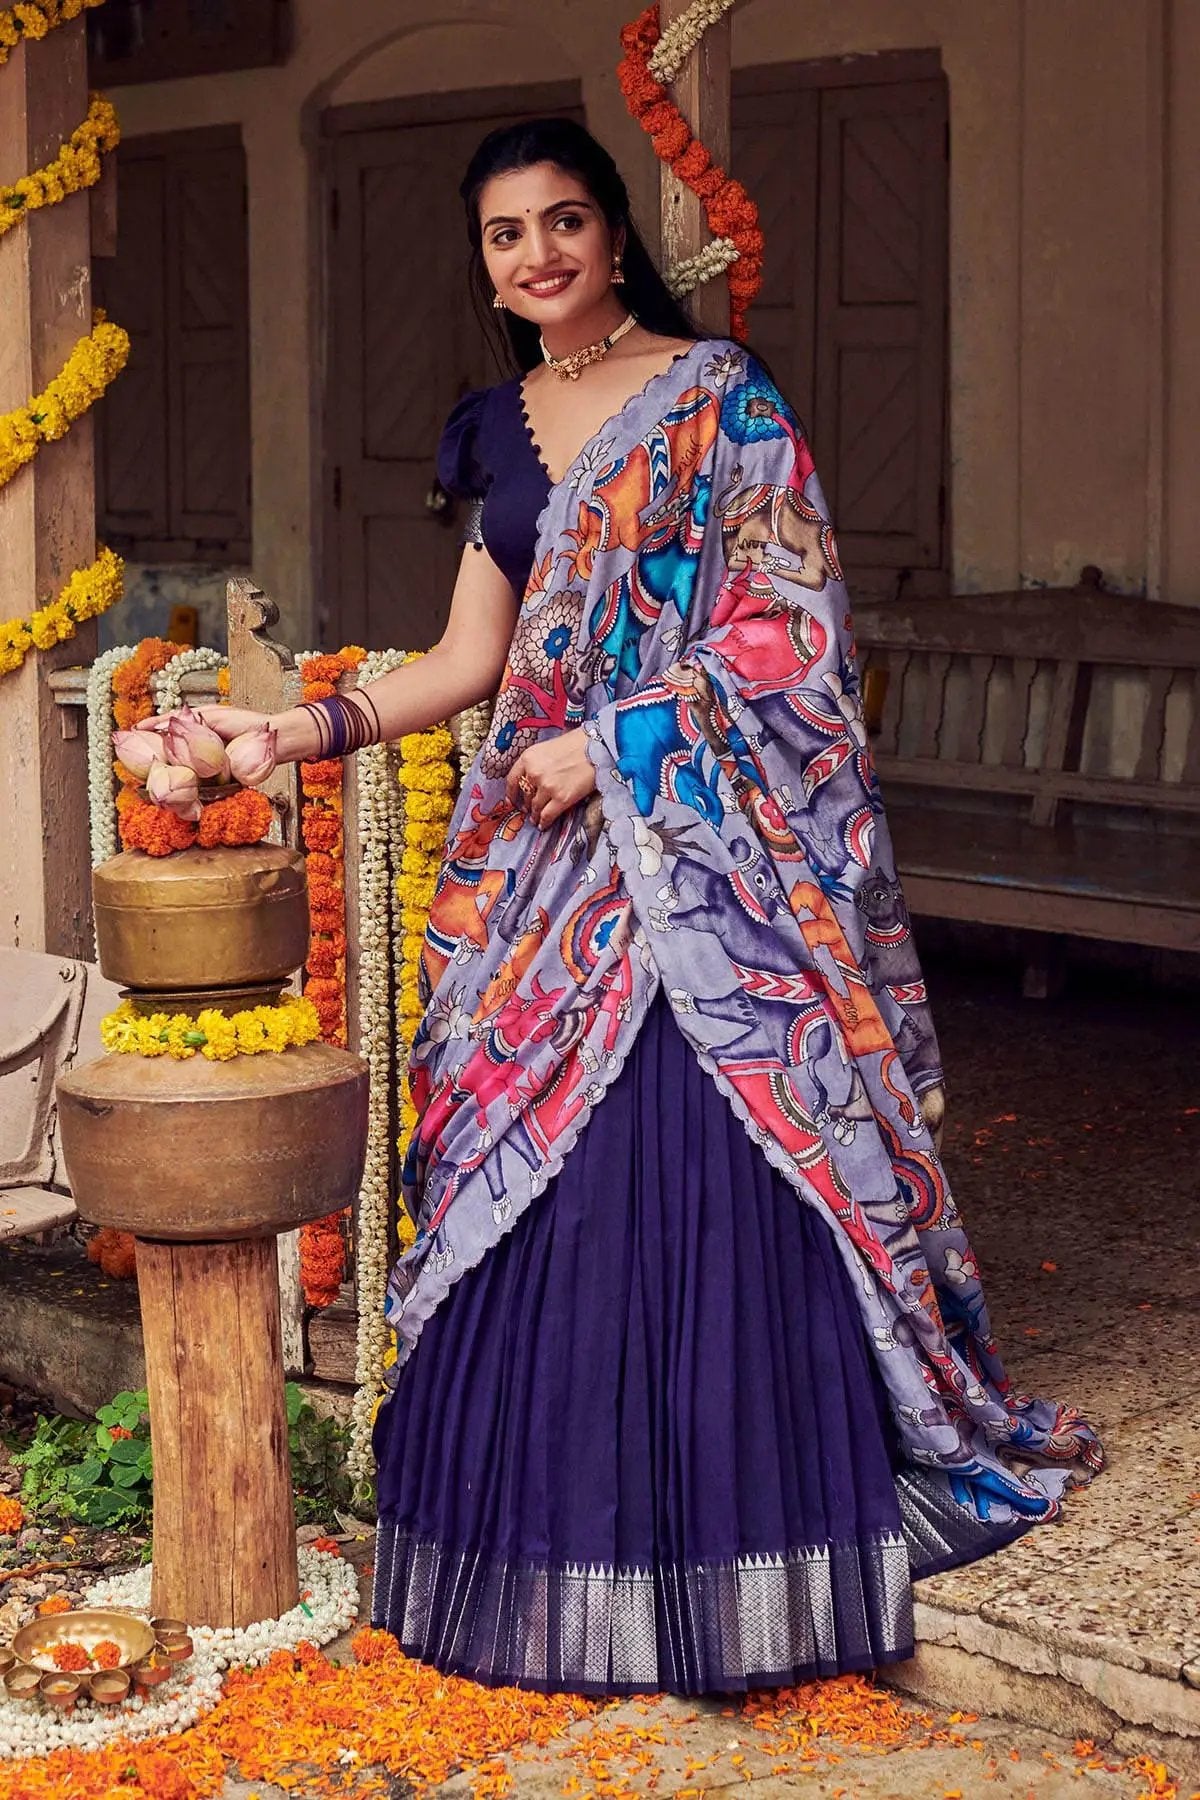 Which are the Top 6 Eye-Catching Indian Dresses for Women?